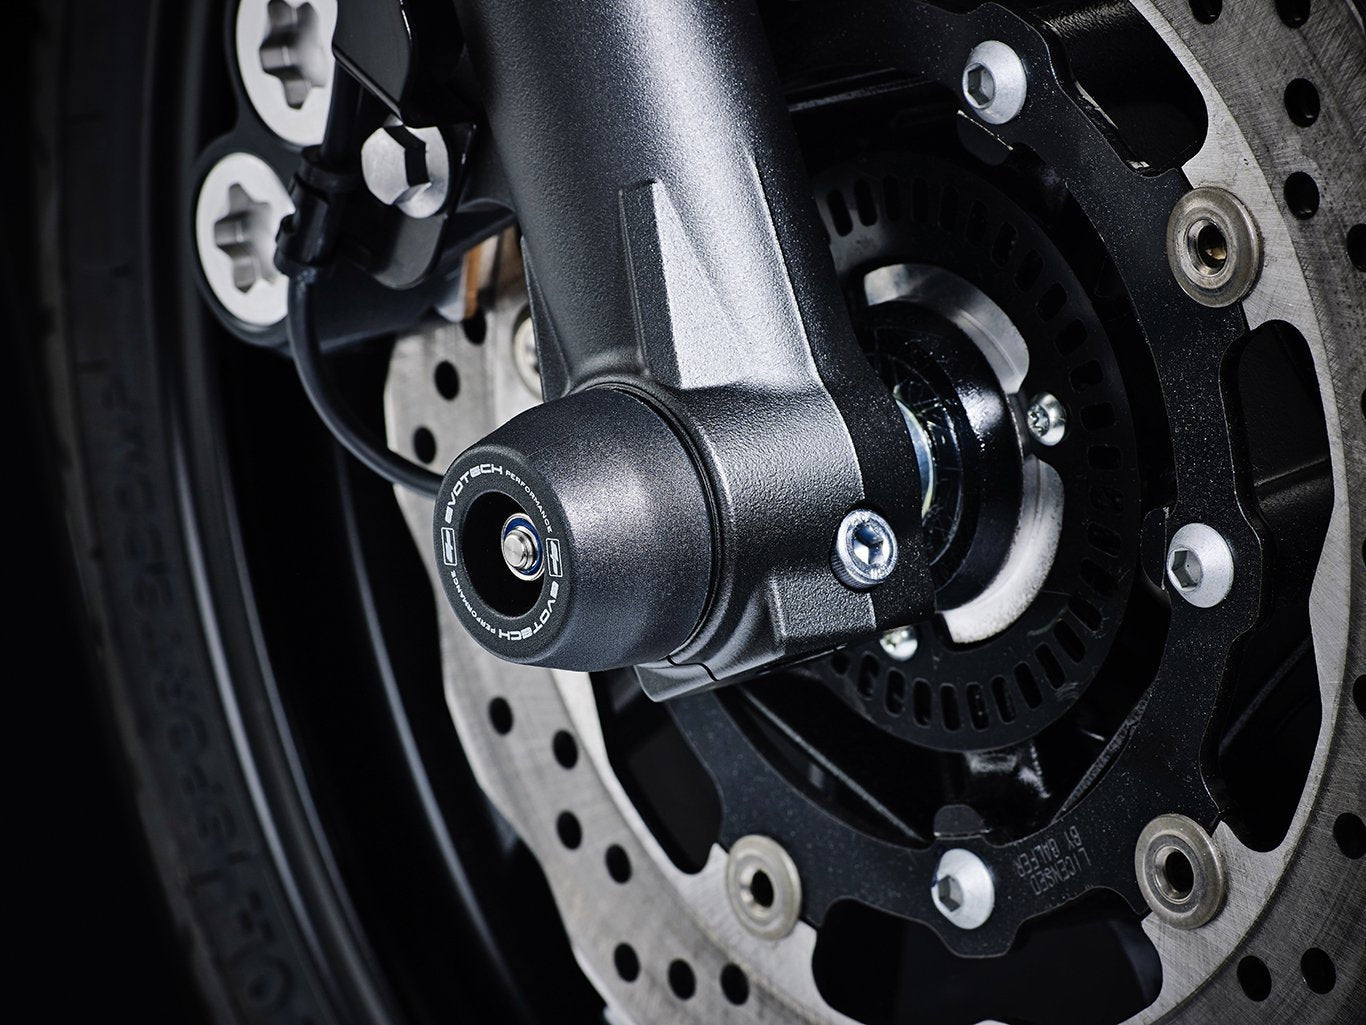 The precision fit of the EP bobbin to the front wheel of the Yamaha FZ-07 from the EP Spindle Bobbins Kit, extending crash protection to the front forks, spindle retainers and brake calipers. 